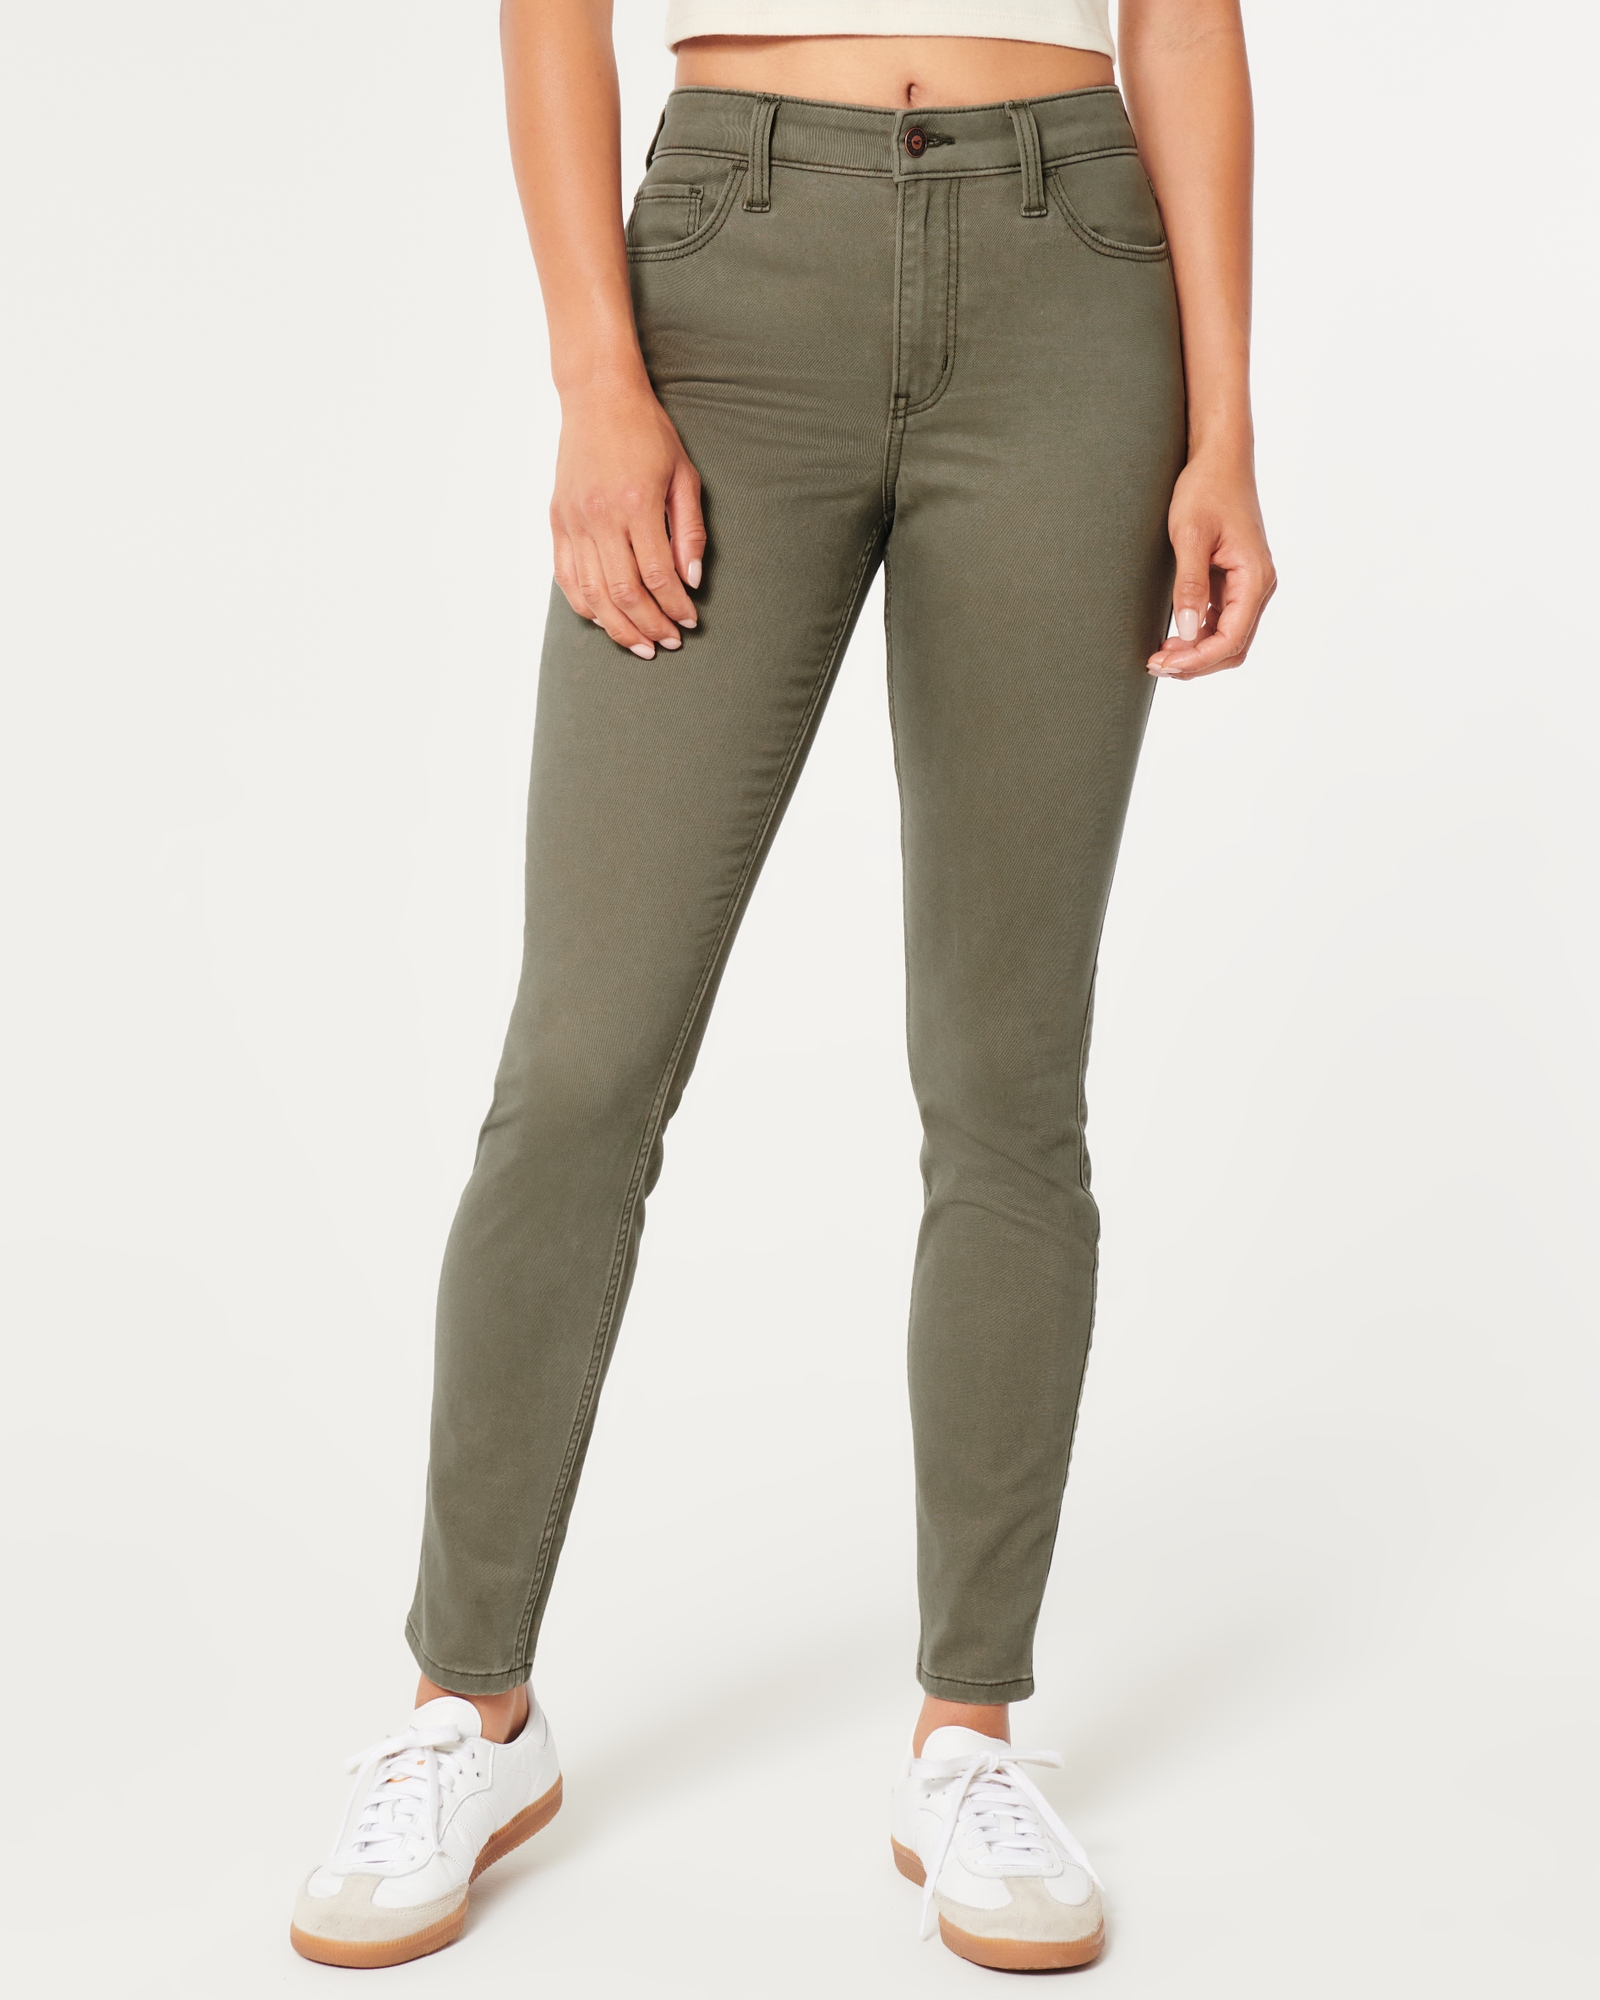 Women's High-Rise Olive Green Super Skinny Jeans, Women's Clearance